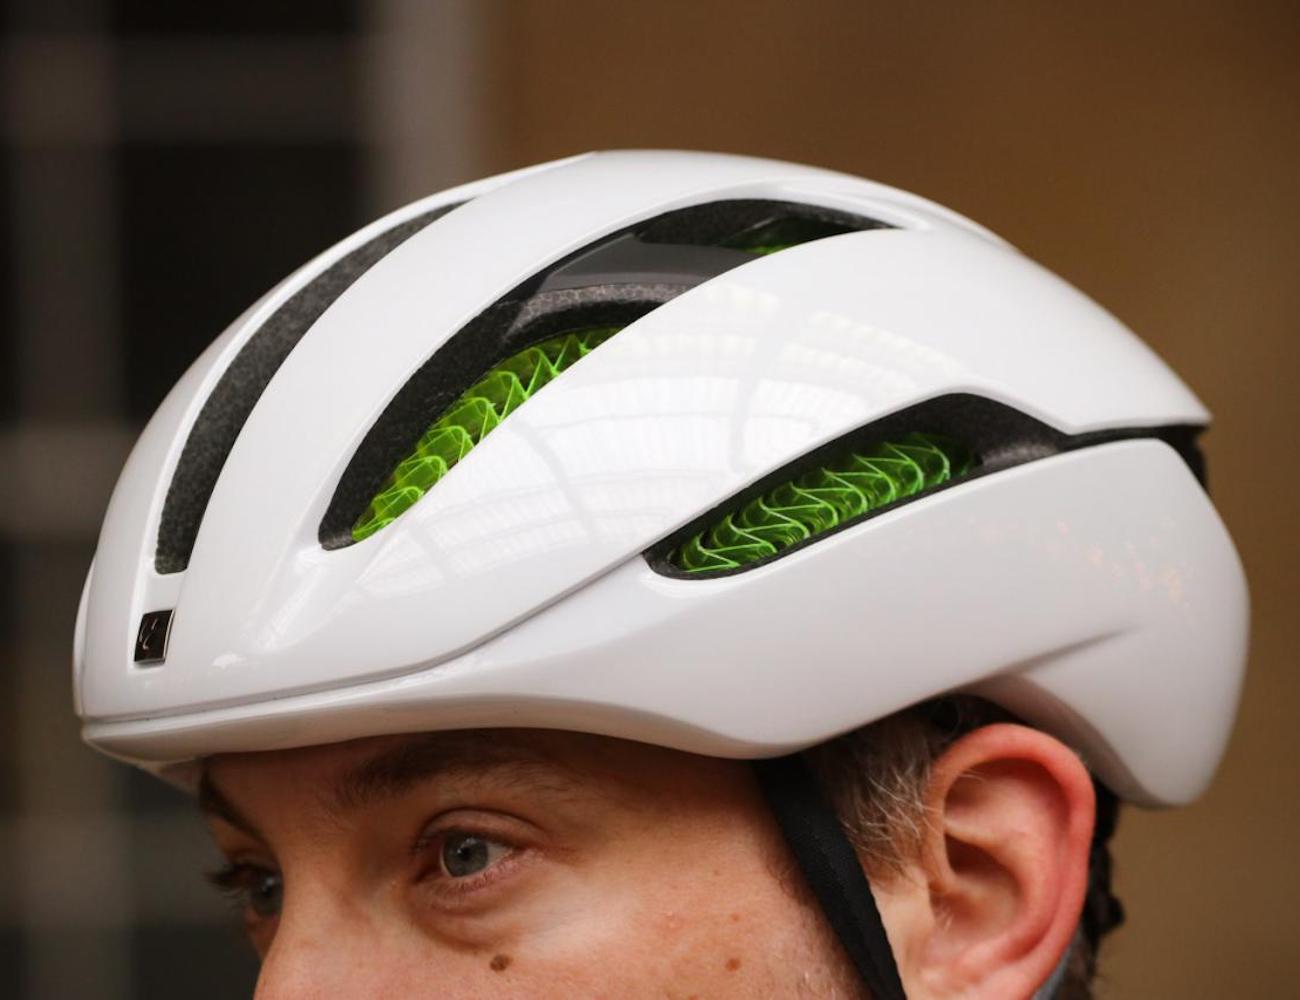 Bontrager Specter WaveCel Road Bike Helmet offers ultimate protection while cycling